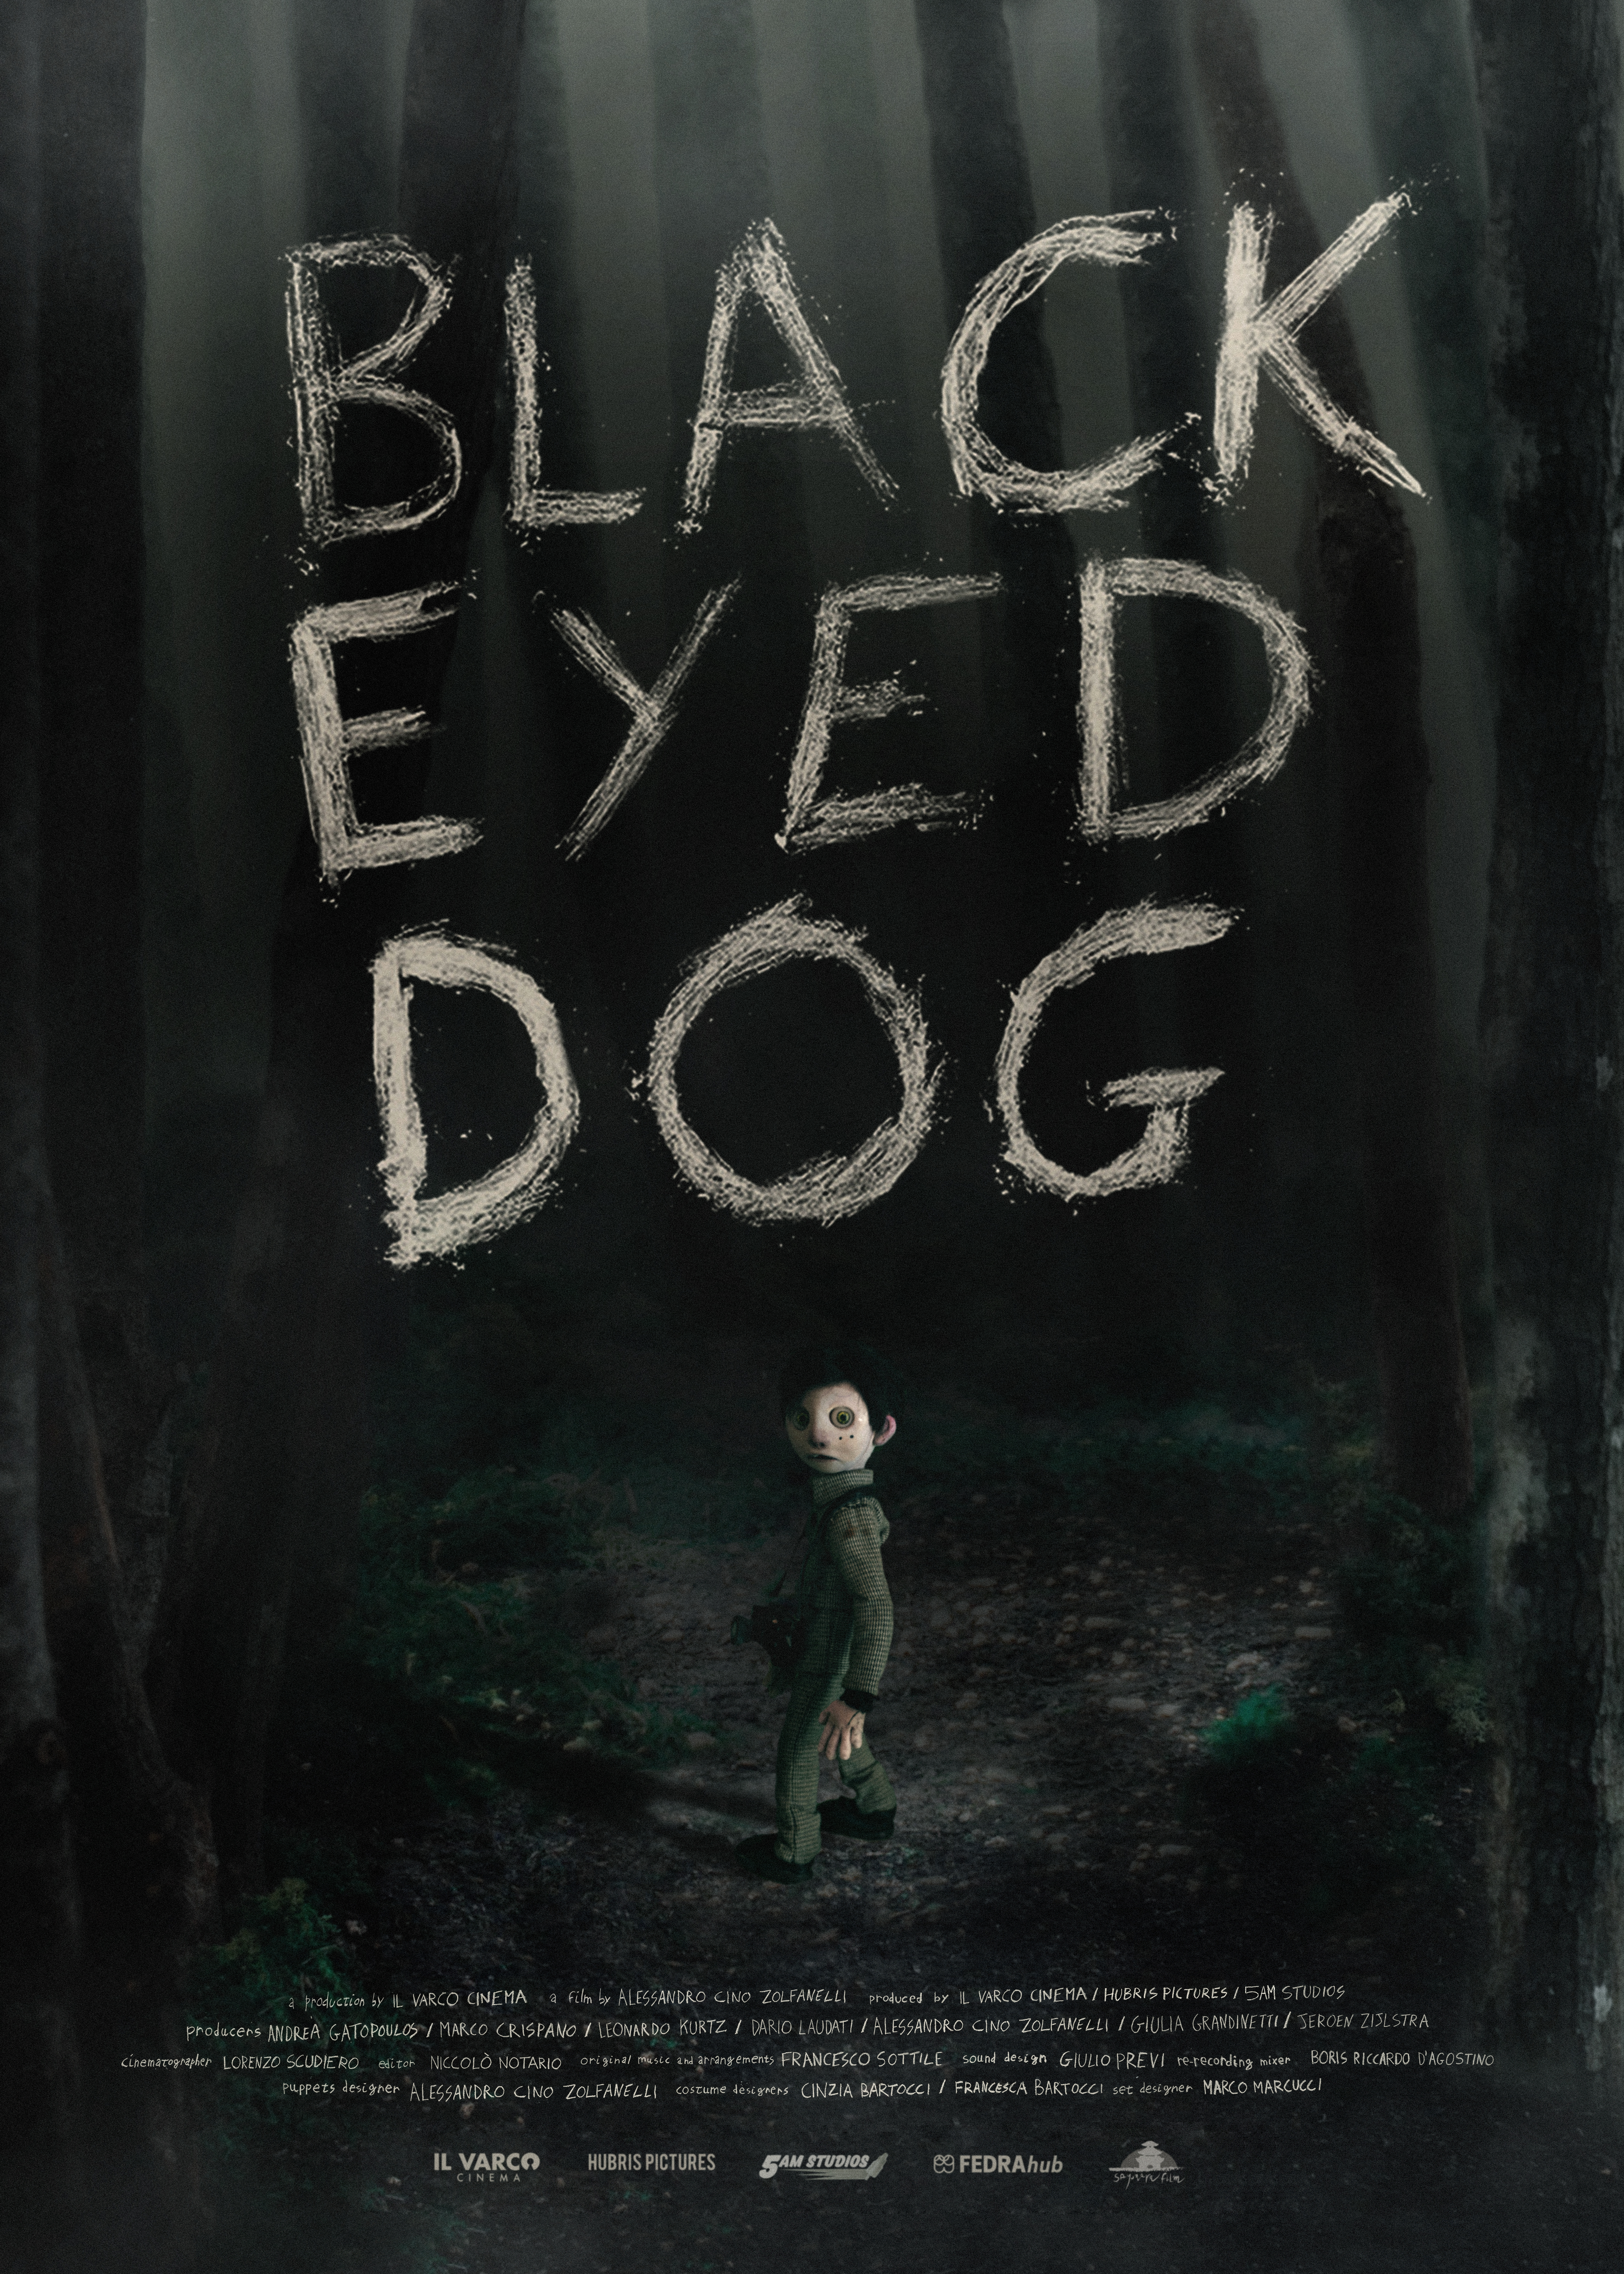 Black Eyed Dog<h3 style="font-size:10px; line-height:20px;">di Alessandro Cino Zolfanelli</h3>